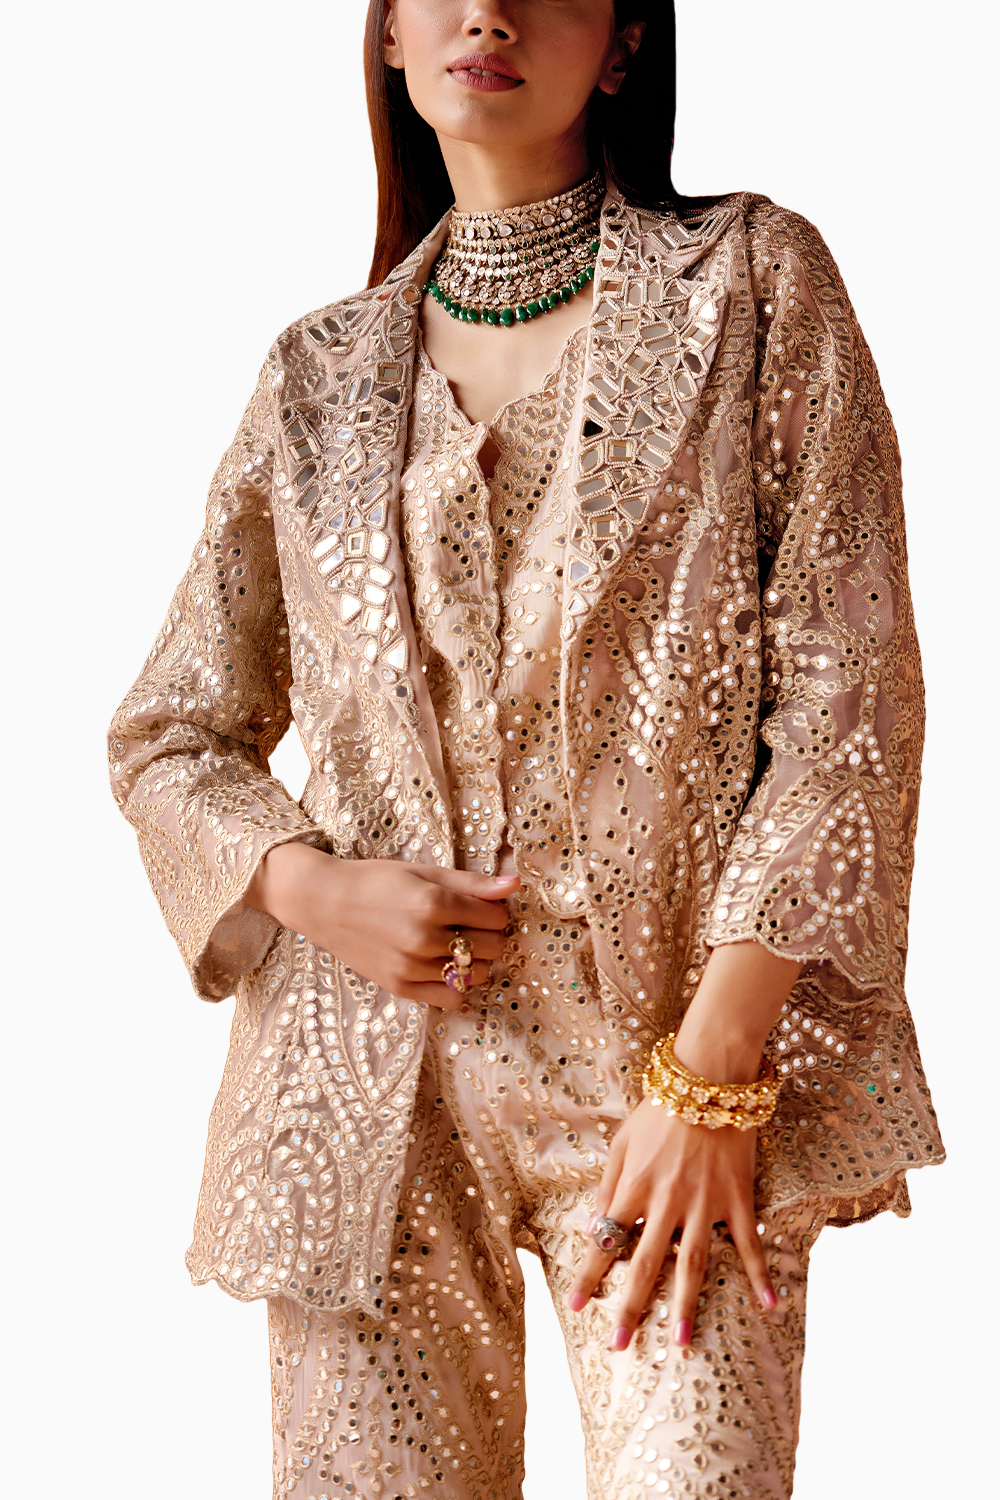 Blush Peach Mirrorwork Scallop Gilet with Scallop coat jacket and Bell Bottoms